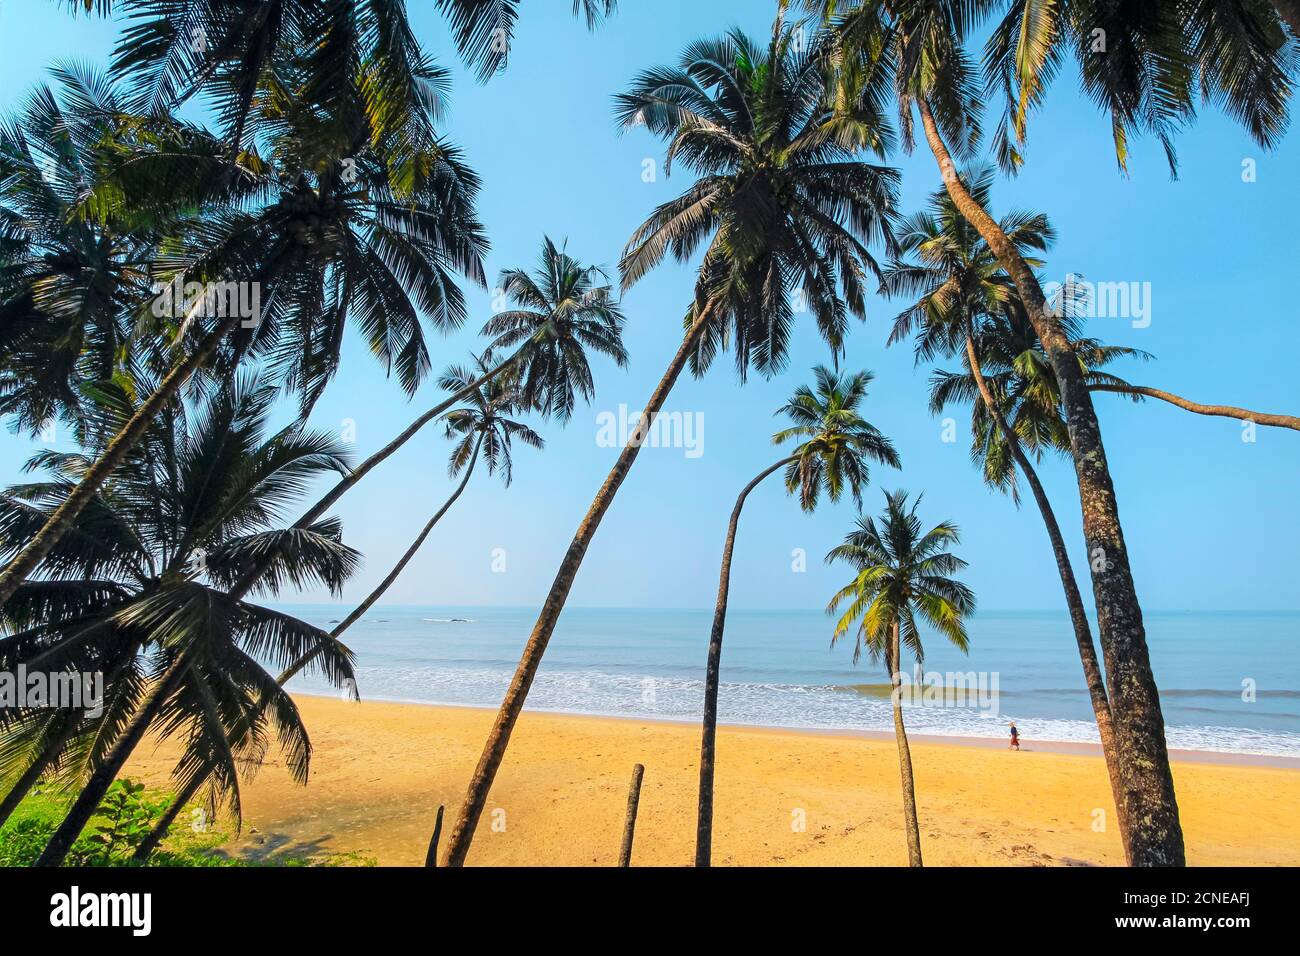 Leaning palm trees at lovely unspoilt deserted Kizhunna Beach, south of Kannur on the state's North coast, Kannur, Kerala, India, Asia Stock Photo